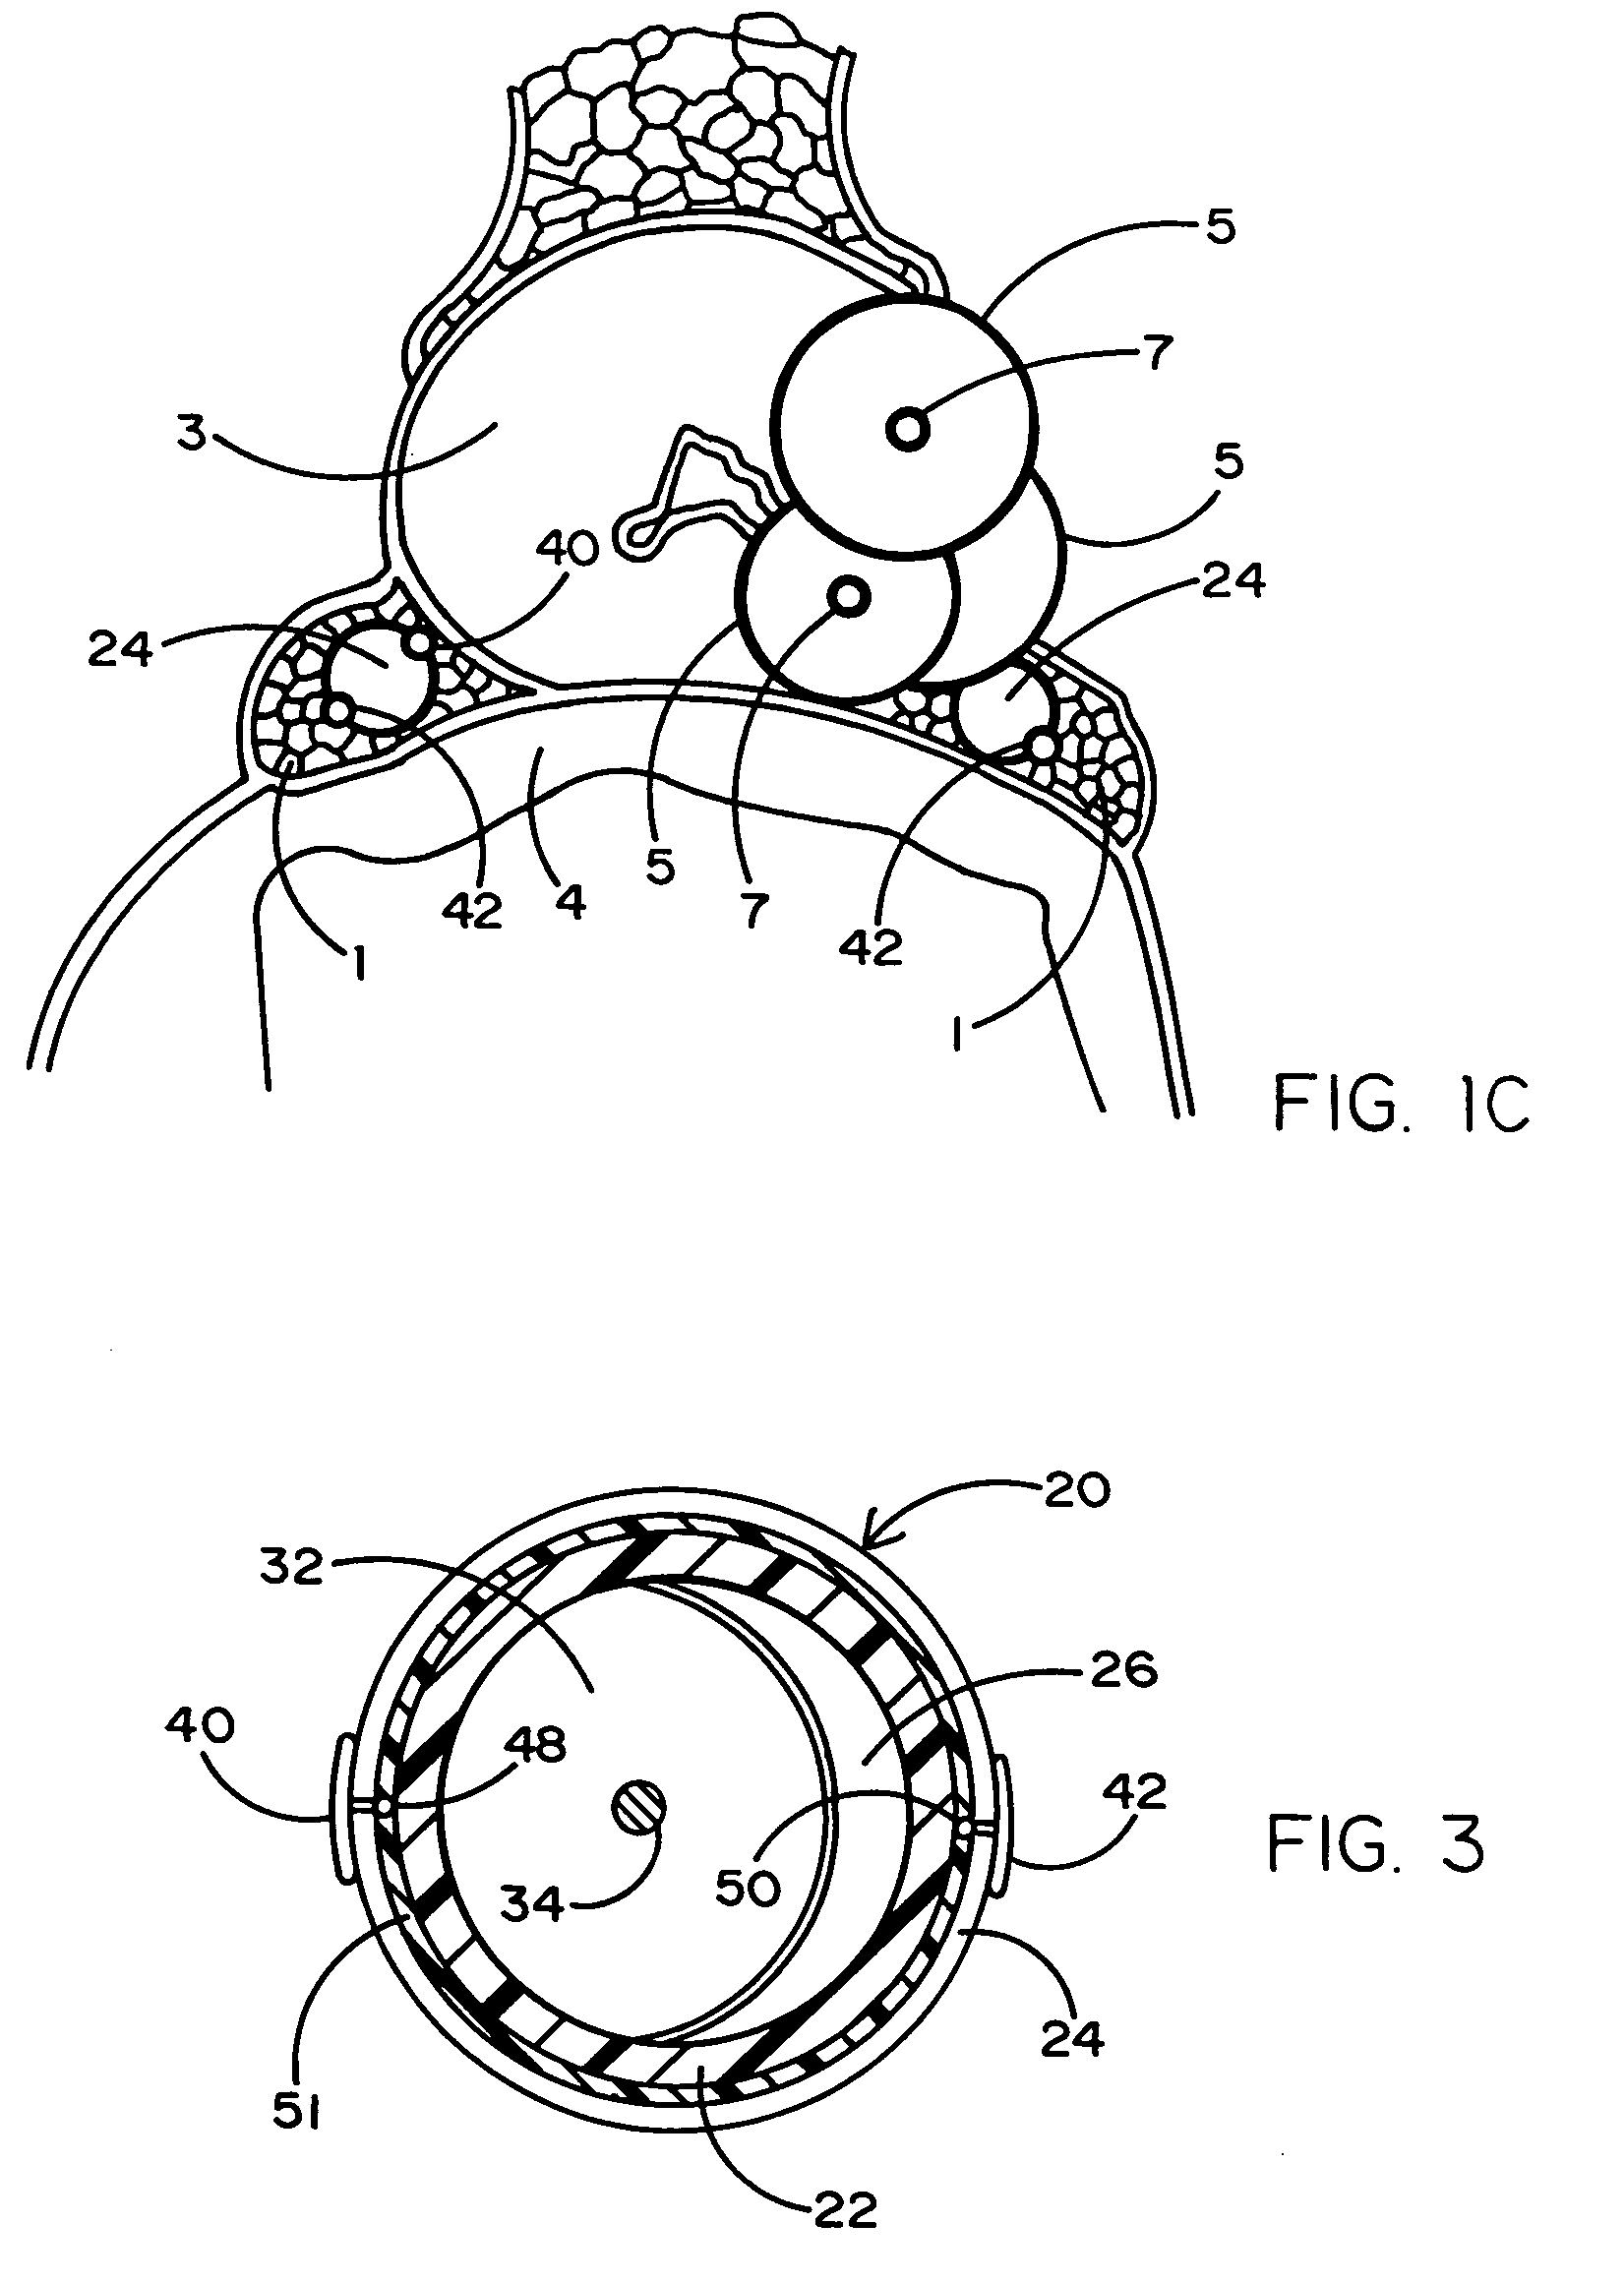 Tissue protective system and method for thermoablative therapies